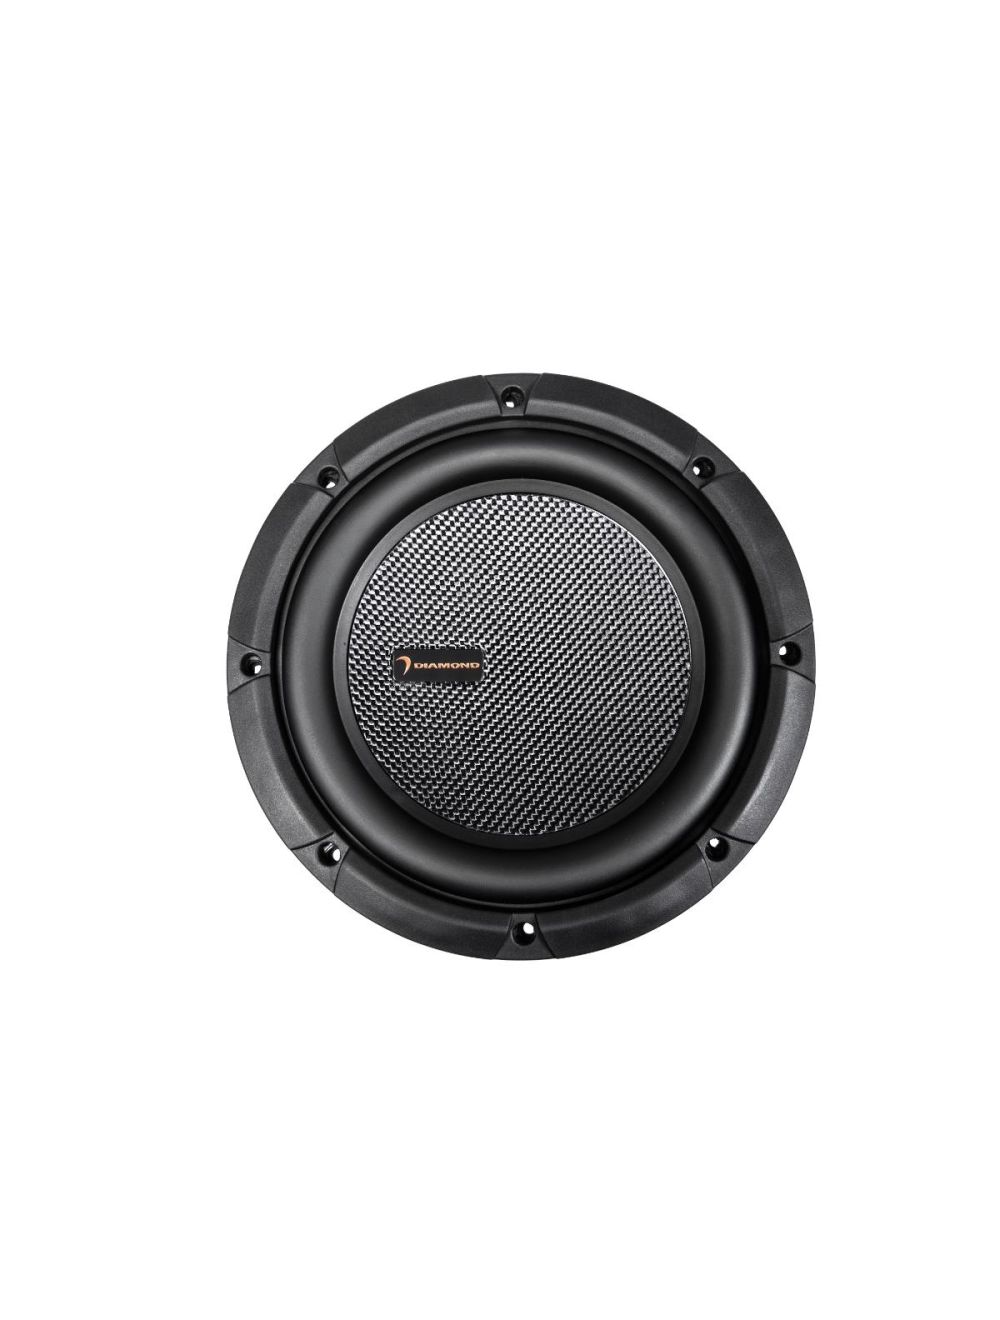 Plakater kardinal ventil 500W RMS, 1000W MAX 4Ω Impedance 10 Inch / 250mm Subwoofer - H104